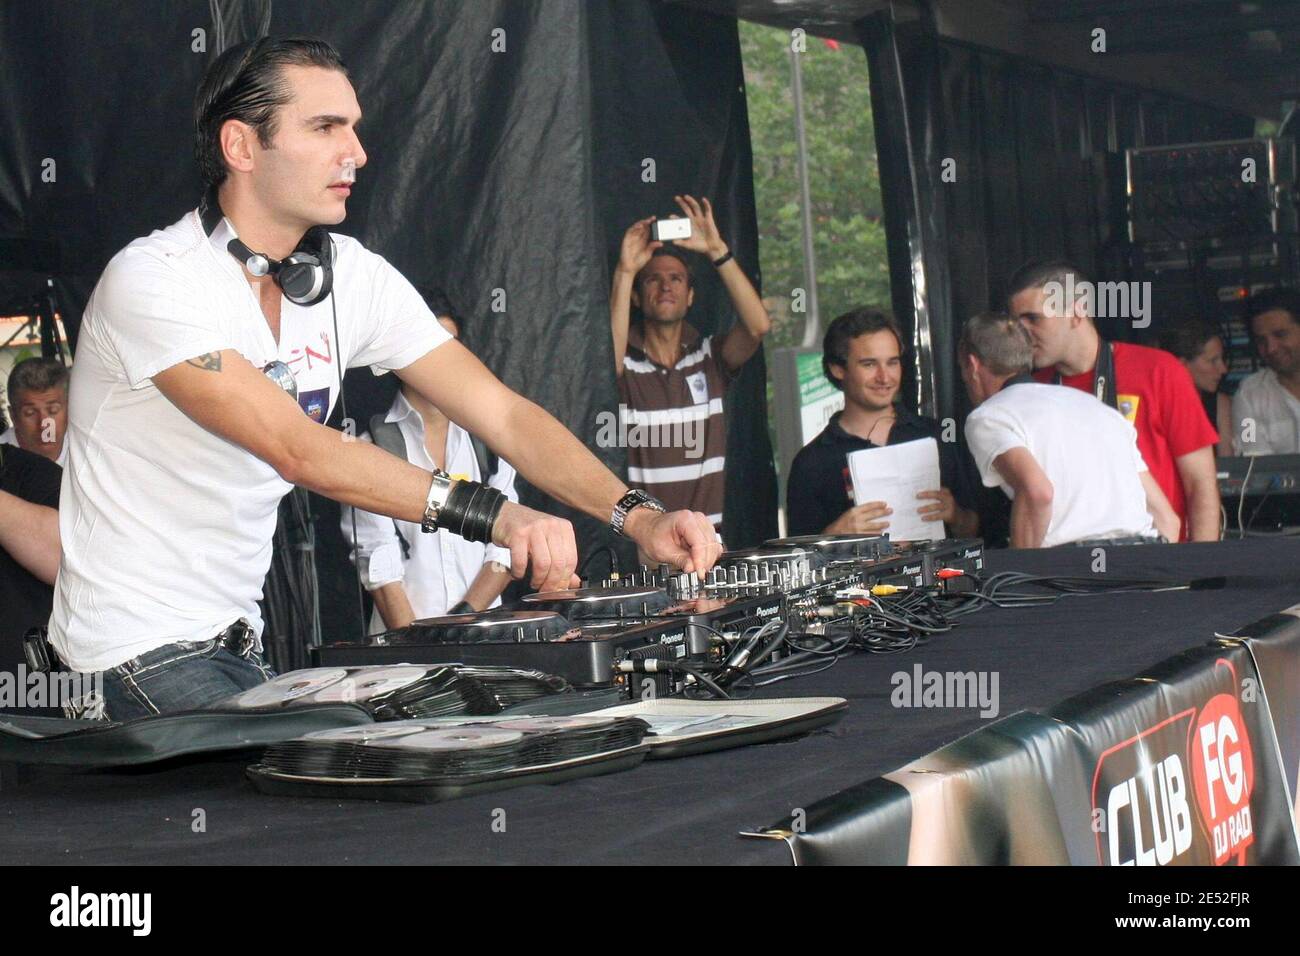 DJ David Vendetta mixes during the radio station FG concert for equal  rights and against discrimination, held at the 'Place de la Bastille' in  Paris, France, on June 28, 2008. Photo by